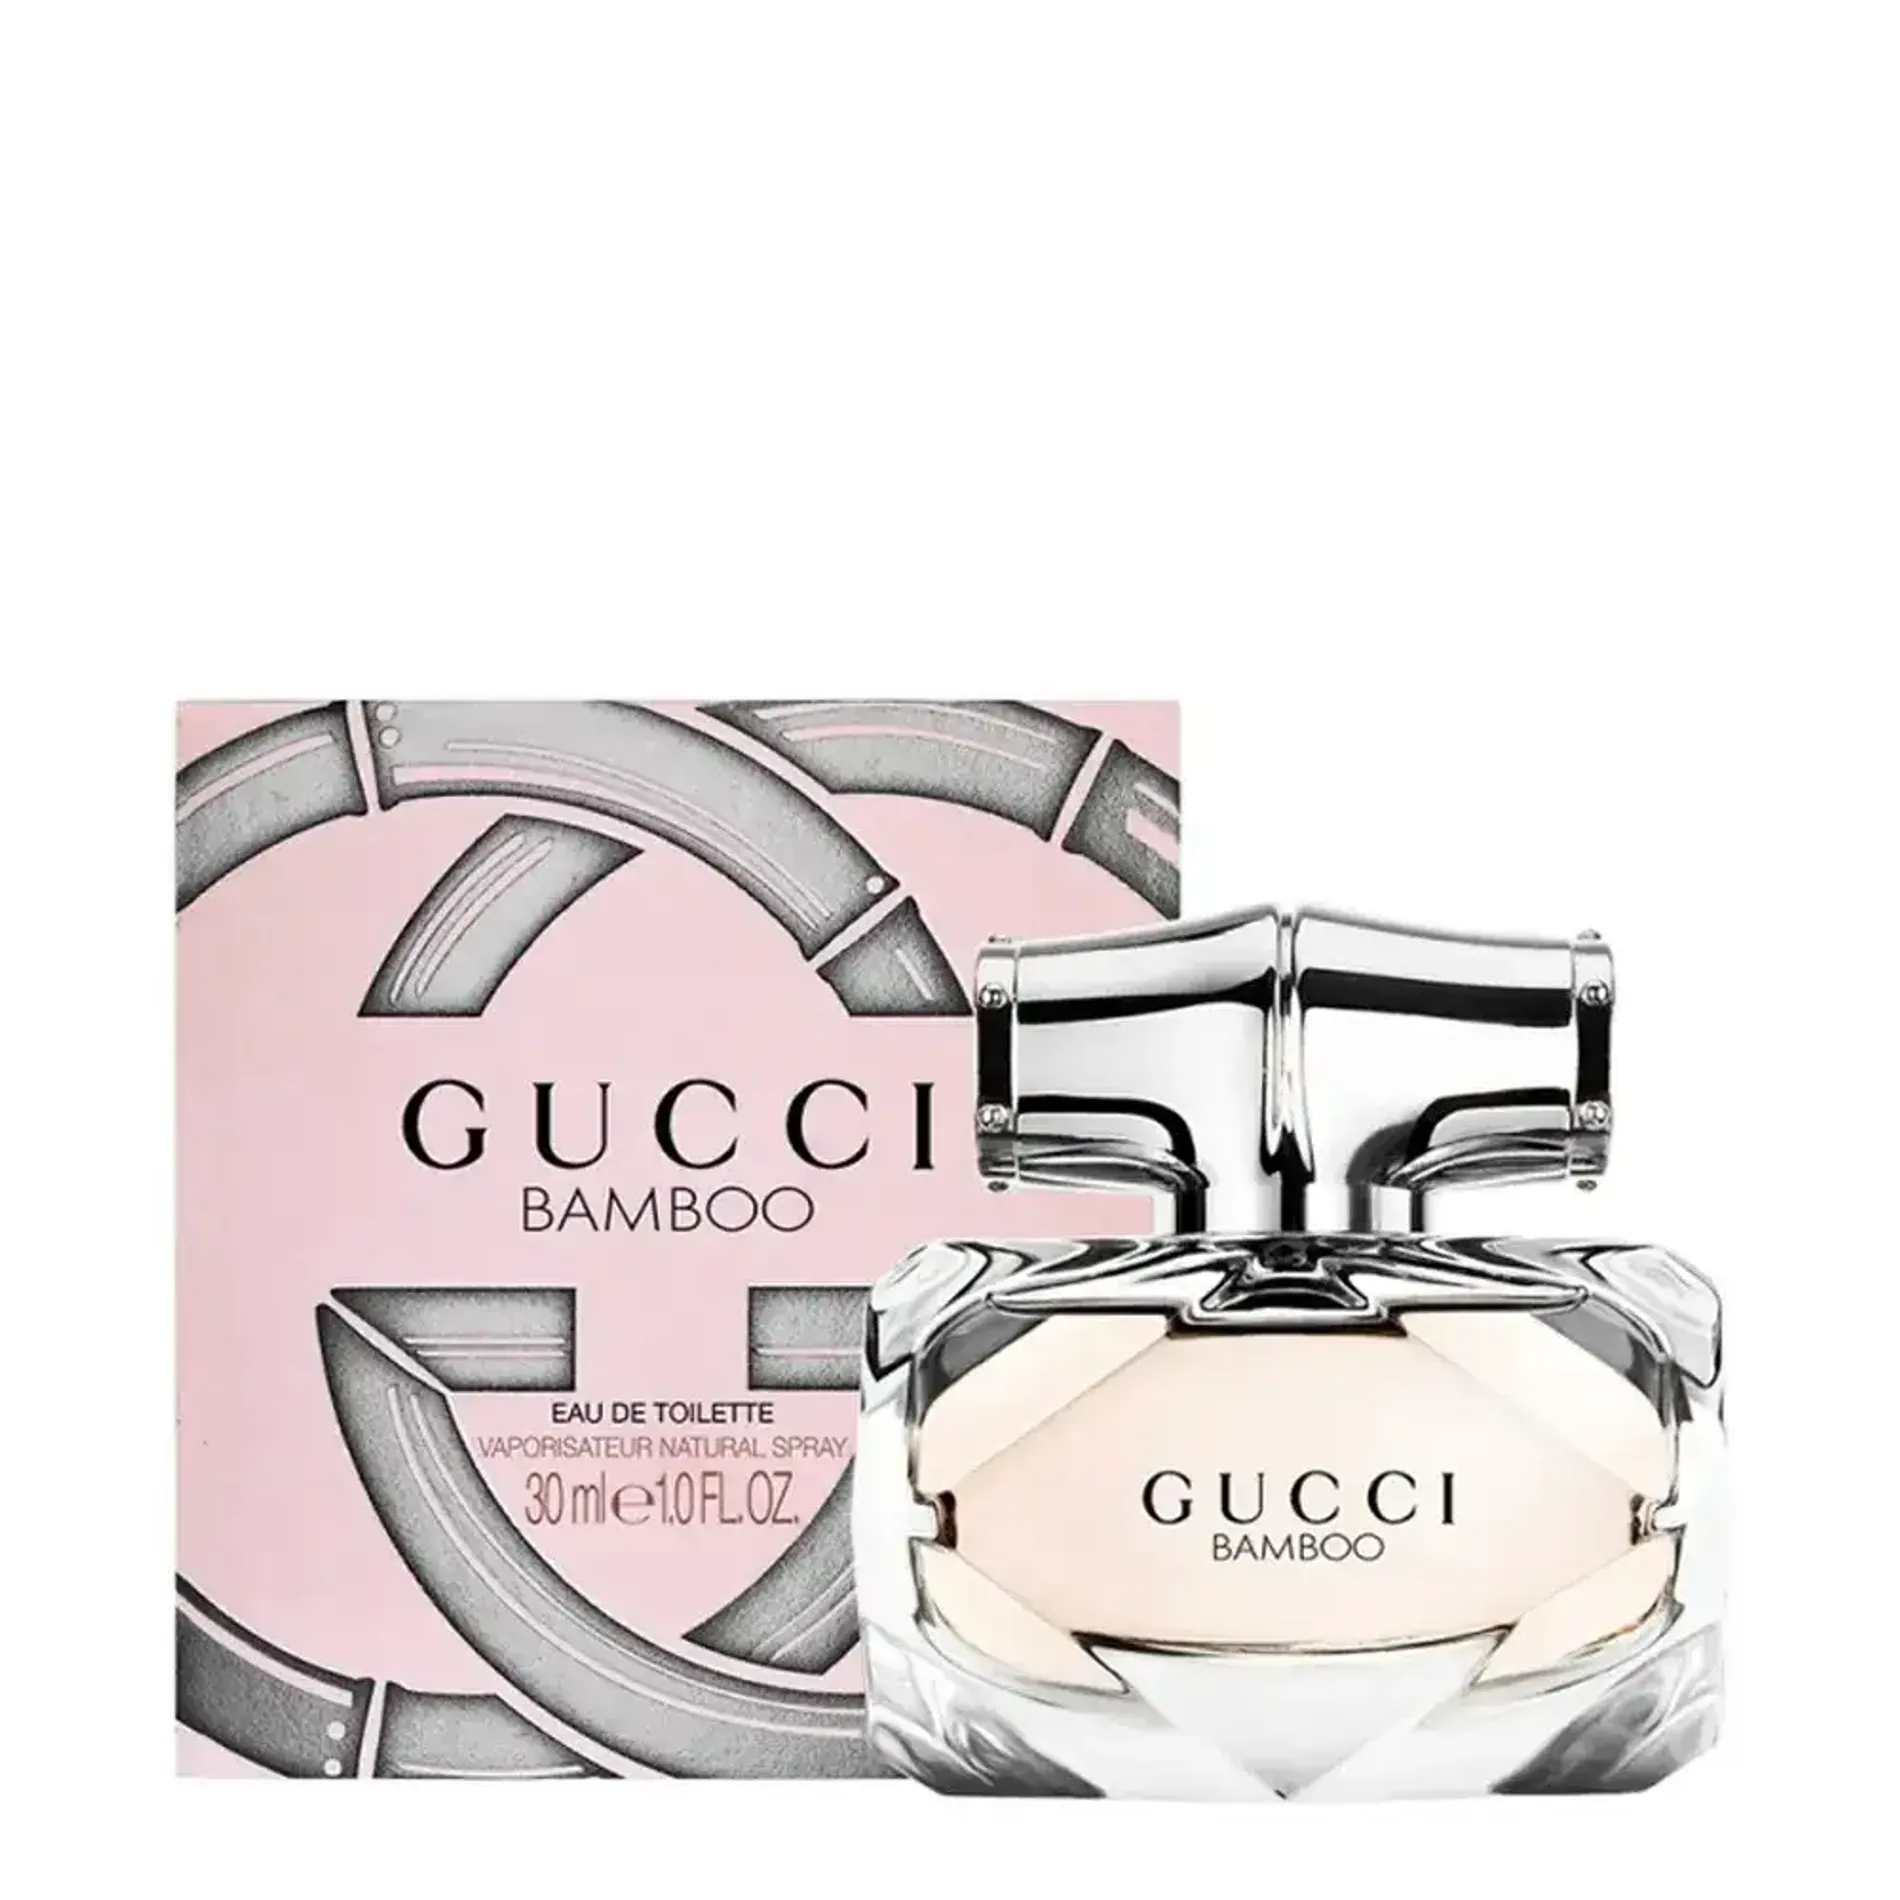 nuoc-hoa-danh-cho-nu-gucci-bamboo-edt-30ml-3